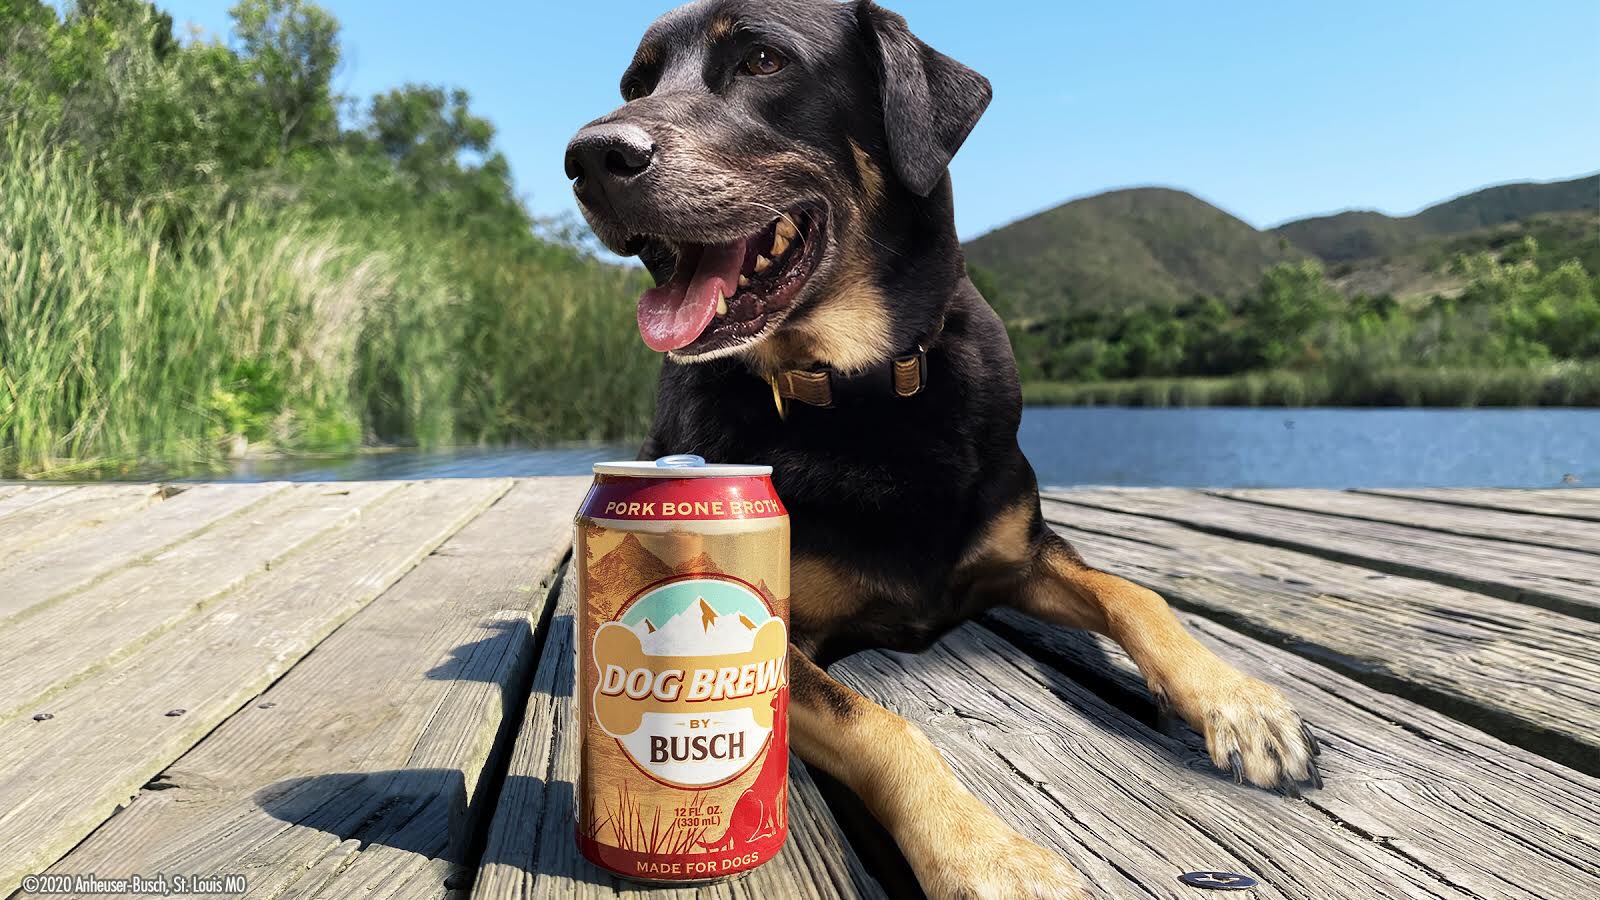 You Can Now Get ‘Beer’ For Your Dog Because, Why Not?